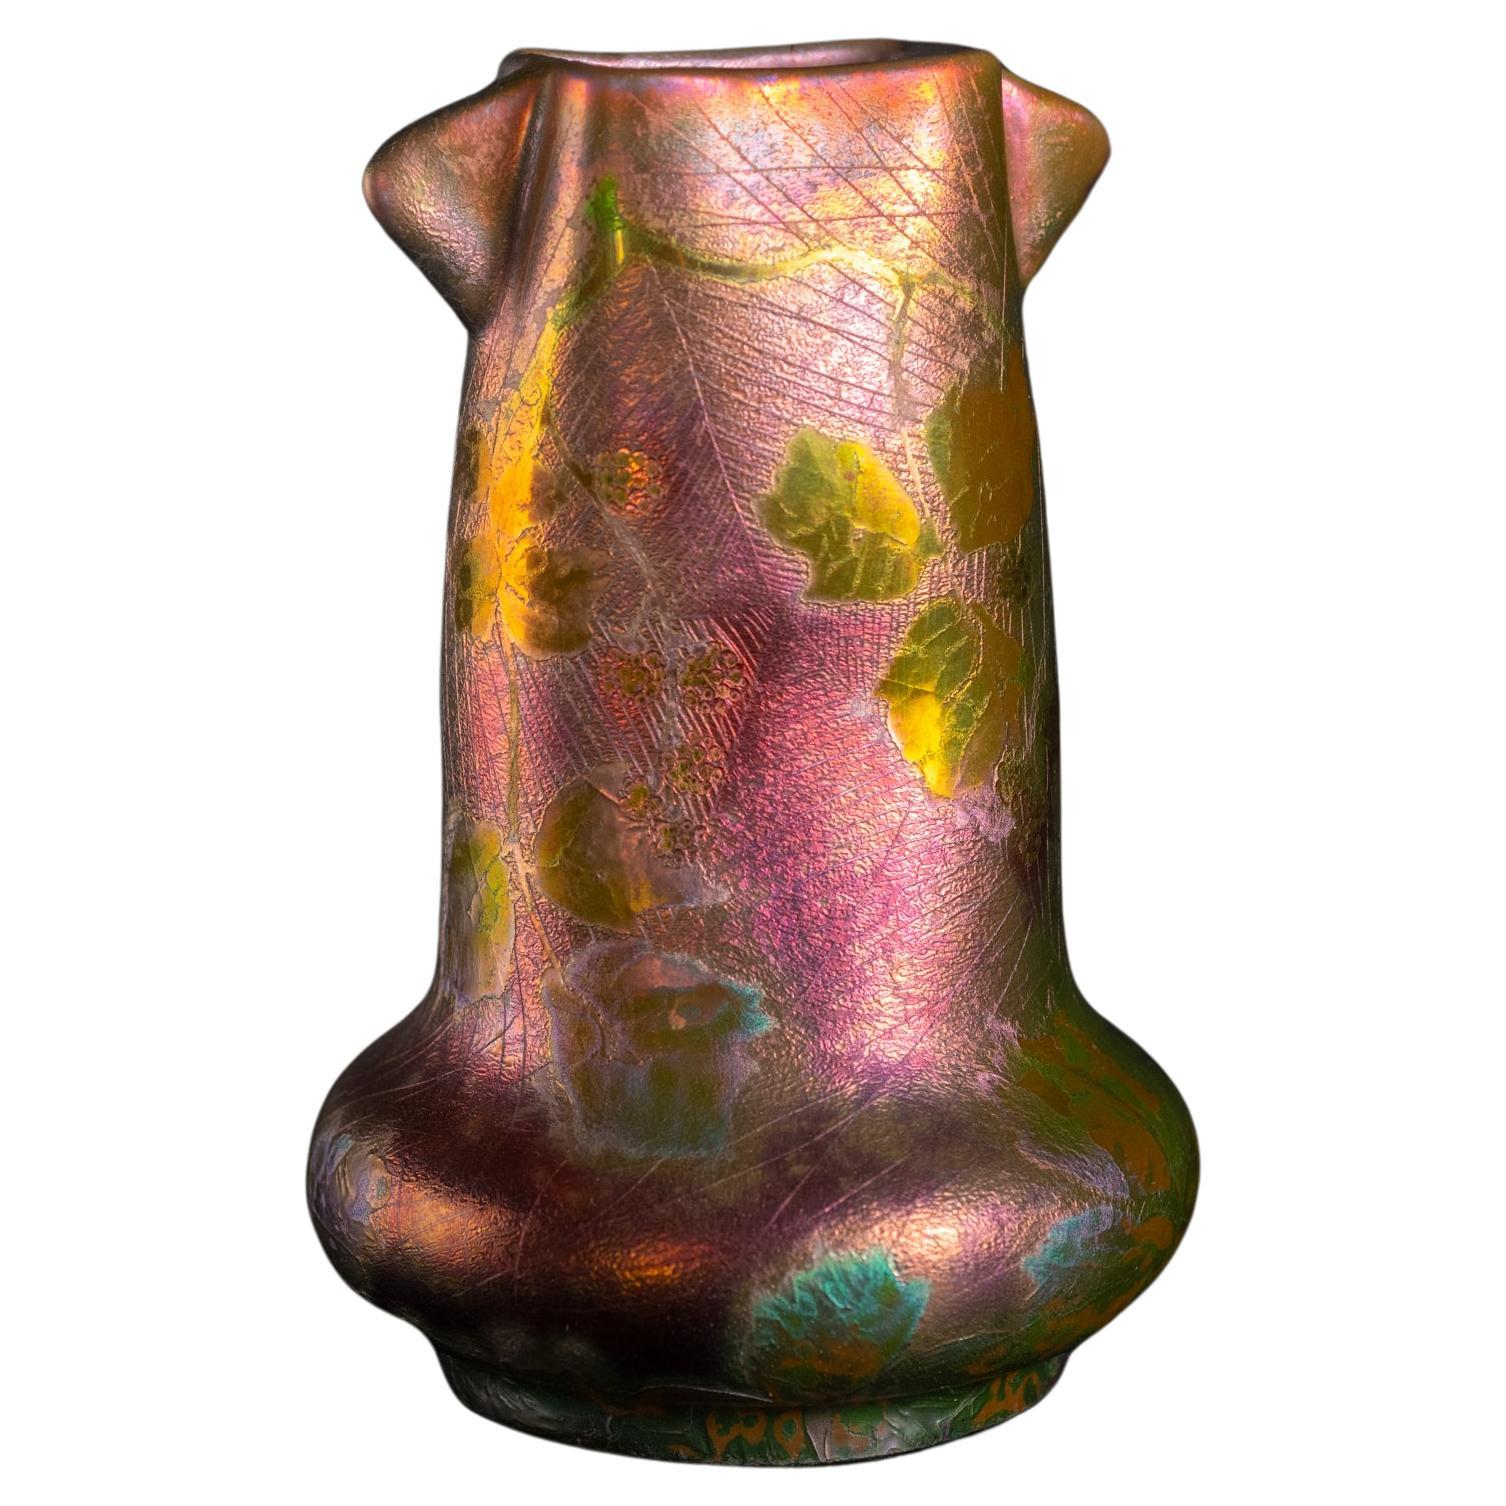 Iridescent Art Nouveau Spiderwebs & Berries Vase by Dhurmer for Clement Massier For Sale